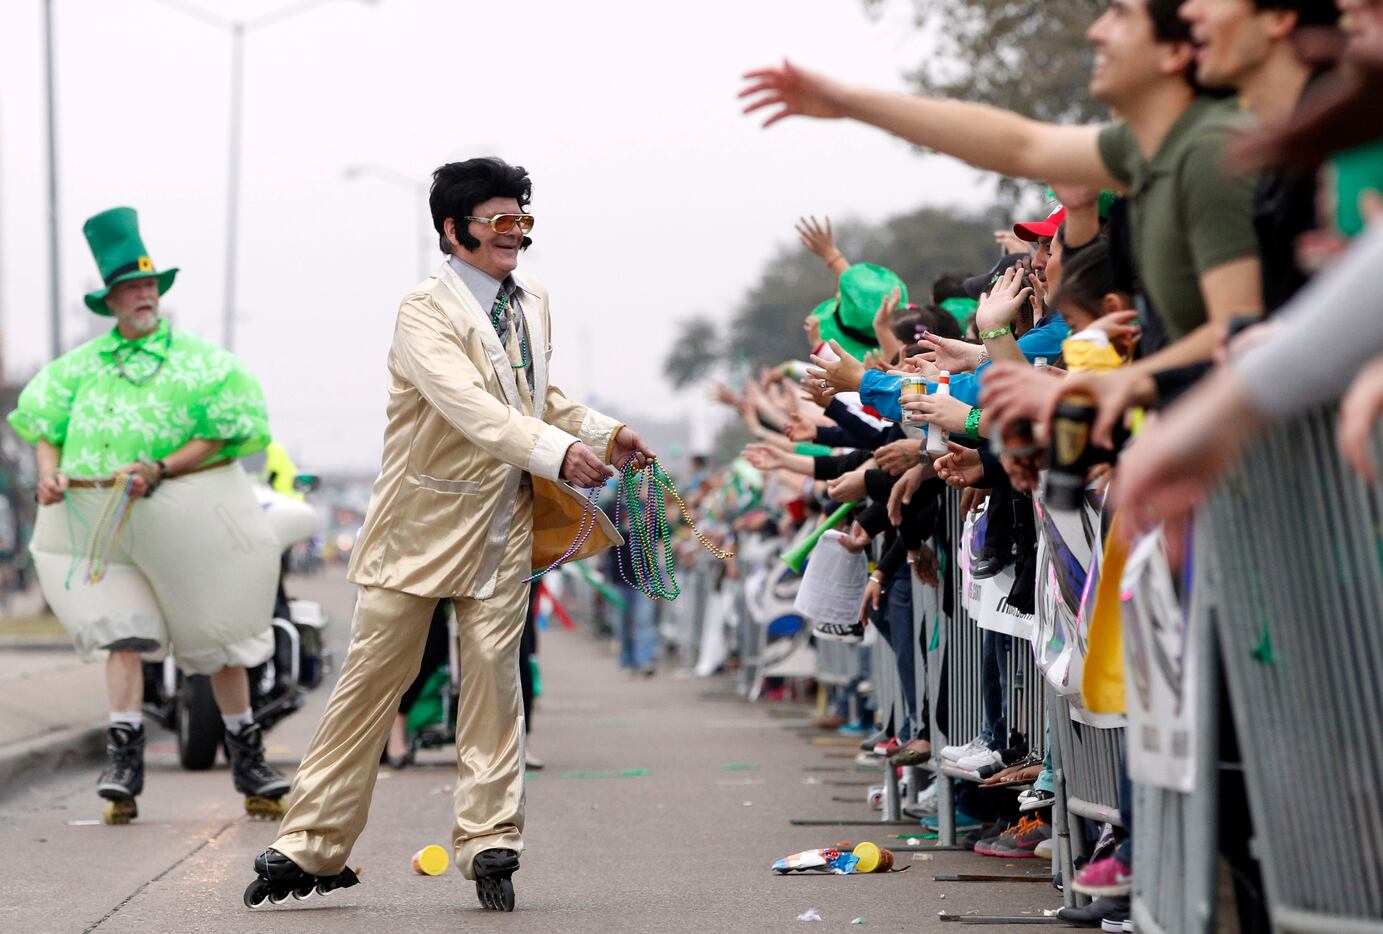 An Elvis impersonator handed out beads  during the Dallas St. Patrick's Parade & Festival.